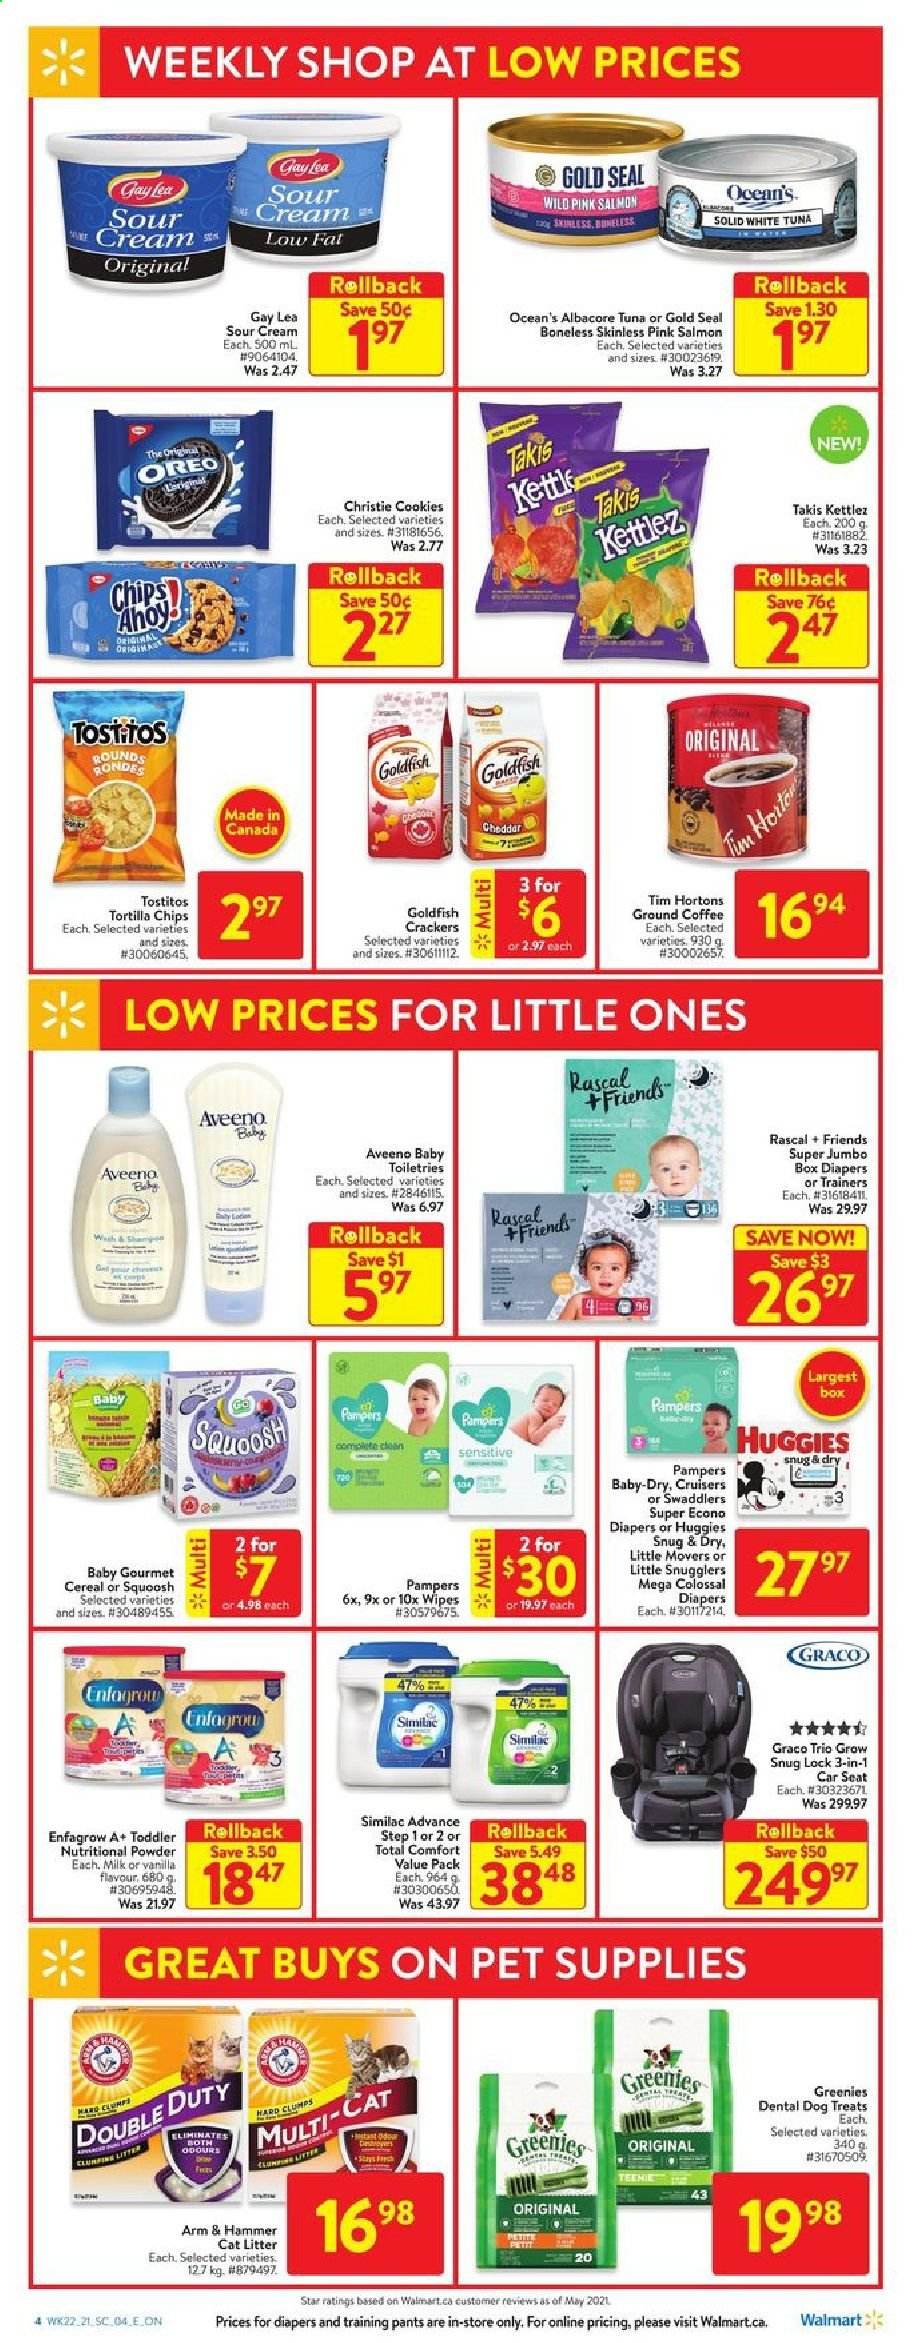 thumbnail - Walmart Flyer - June 24, 2021 - June 30, 2021 - Sales products - salmon, tuna, Oreo, milk, sour cream, cookies, crackers, tortilla chips, Goldfish, Tostitos, ARM & HAMMER, cereals, coffee, ground coffee, Similac, wipes, pants, nappies, baby pants, Aveeno, cat litter, Greenies, Snug, trainers, baby car seat, Huggies, Pampers, chips. Page 7.